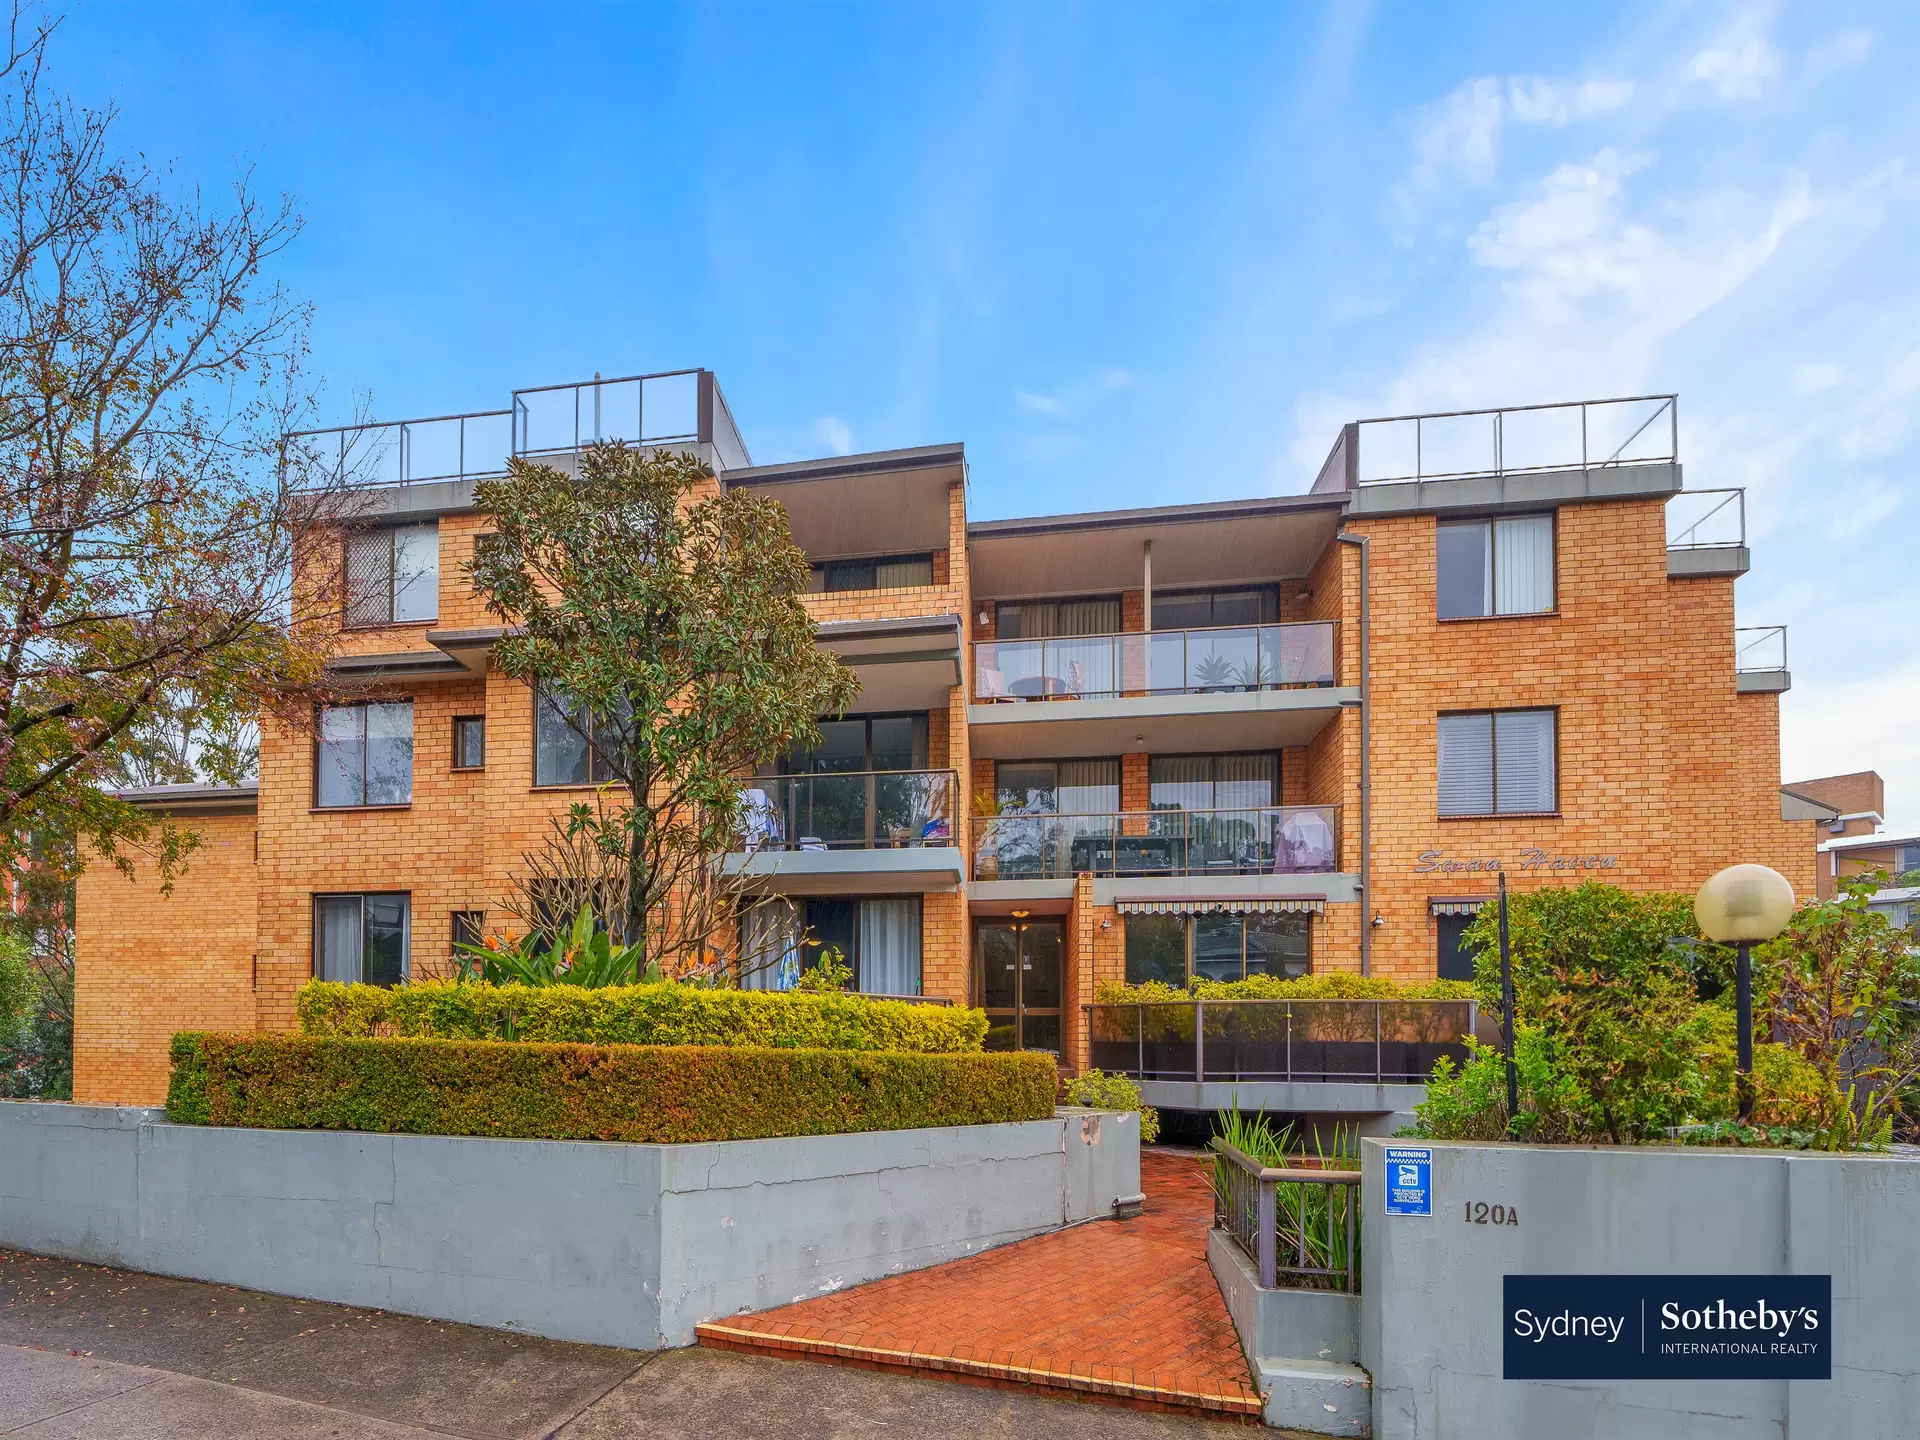 8/120a Clovelly Road, Randwick Leased by Sydney Sotheby's International Realty - image 1